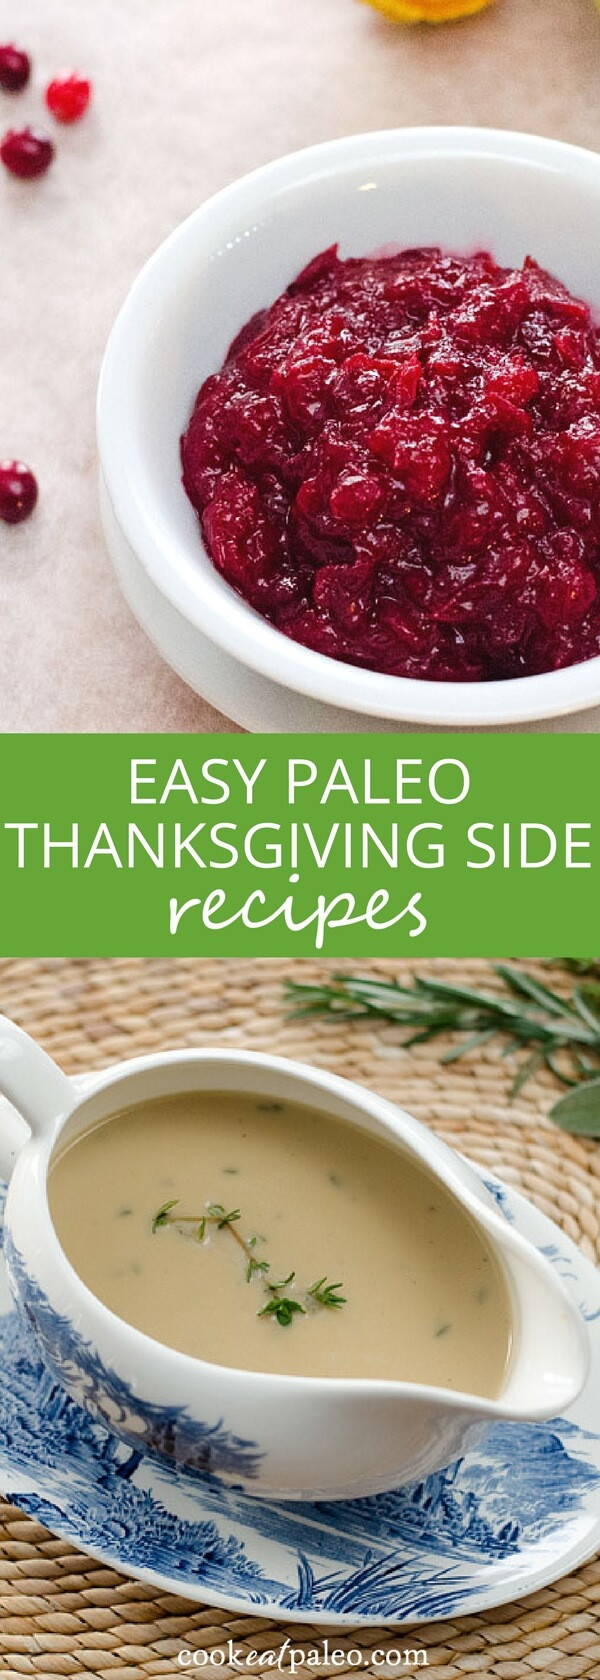 Paleo Thanksgiving Side Dishes
 15 Easy Paleo Thanksgiving Sides